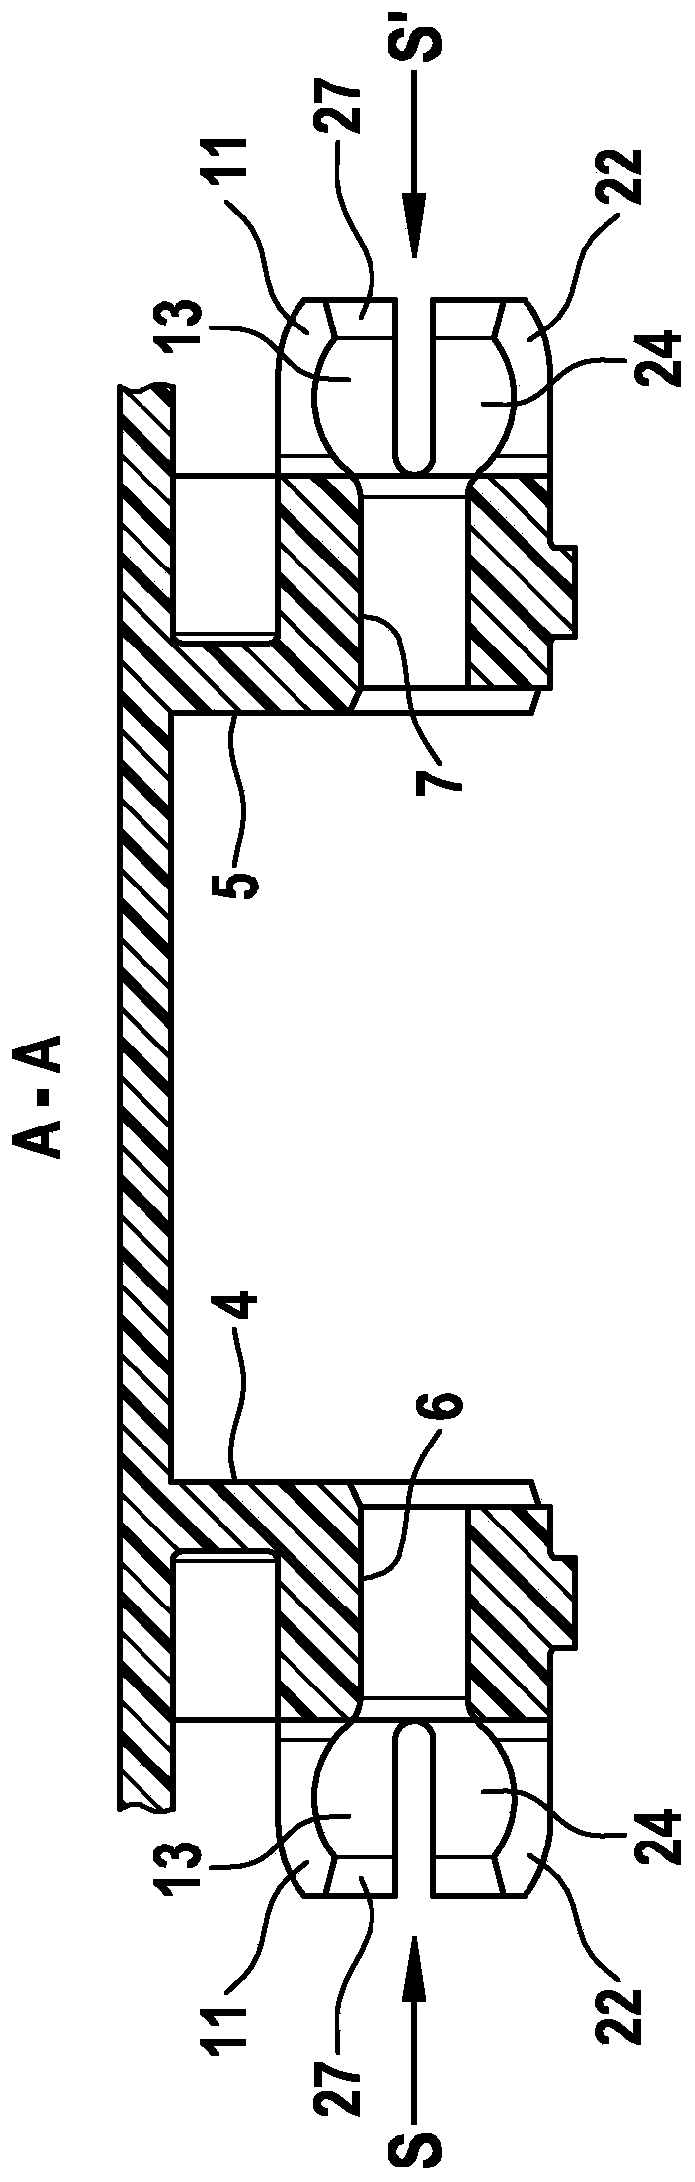 Fluid container having a releasable connection to a vehicle component